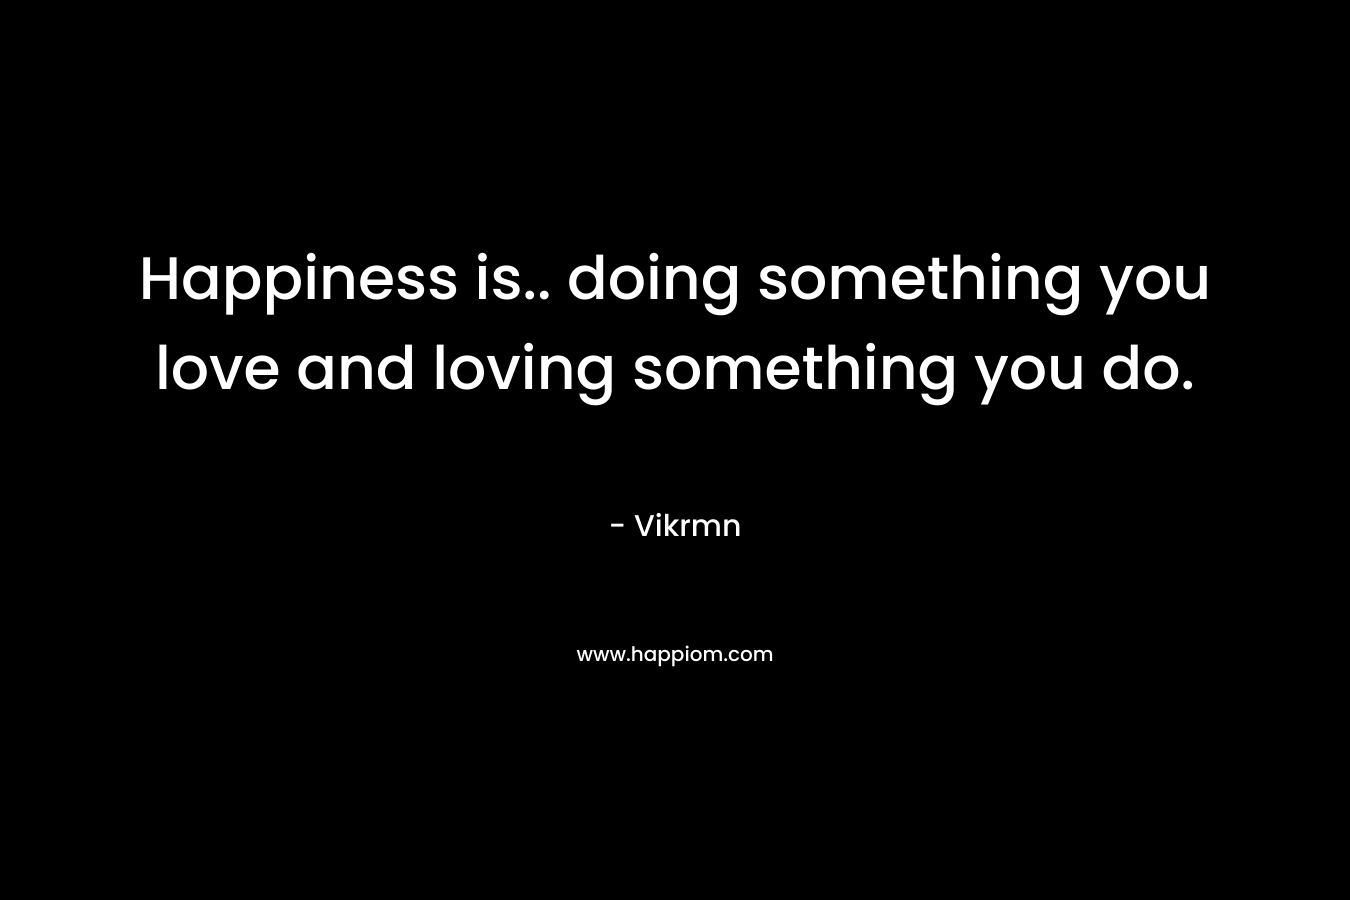 Happiness is.. doing something you love and loving something you do.